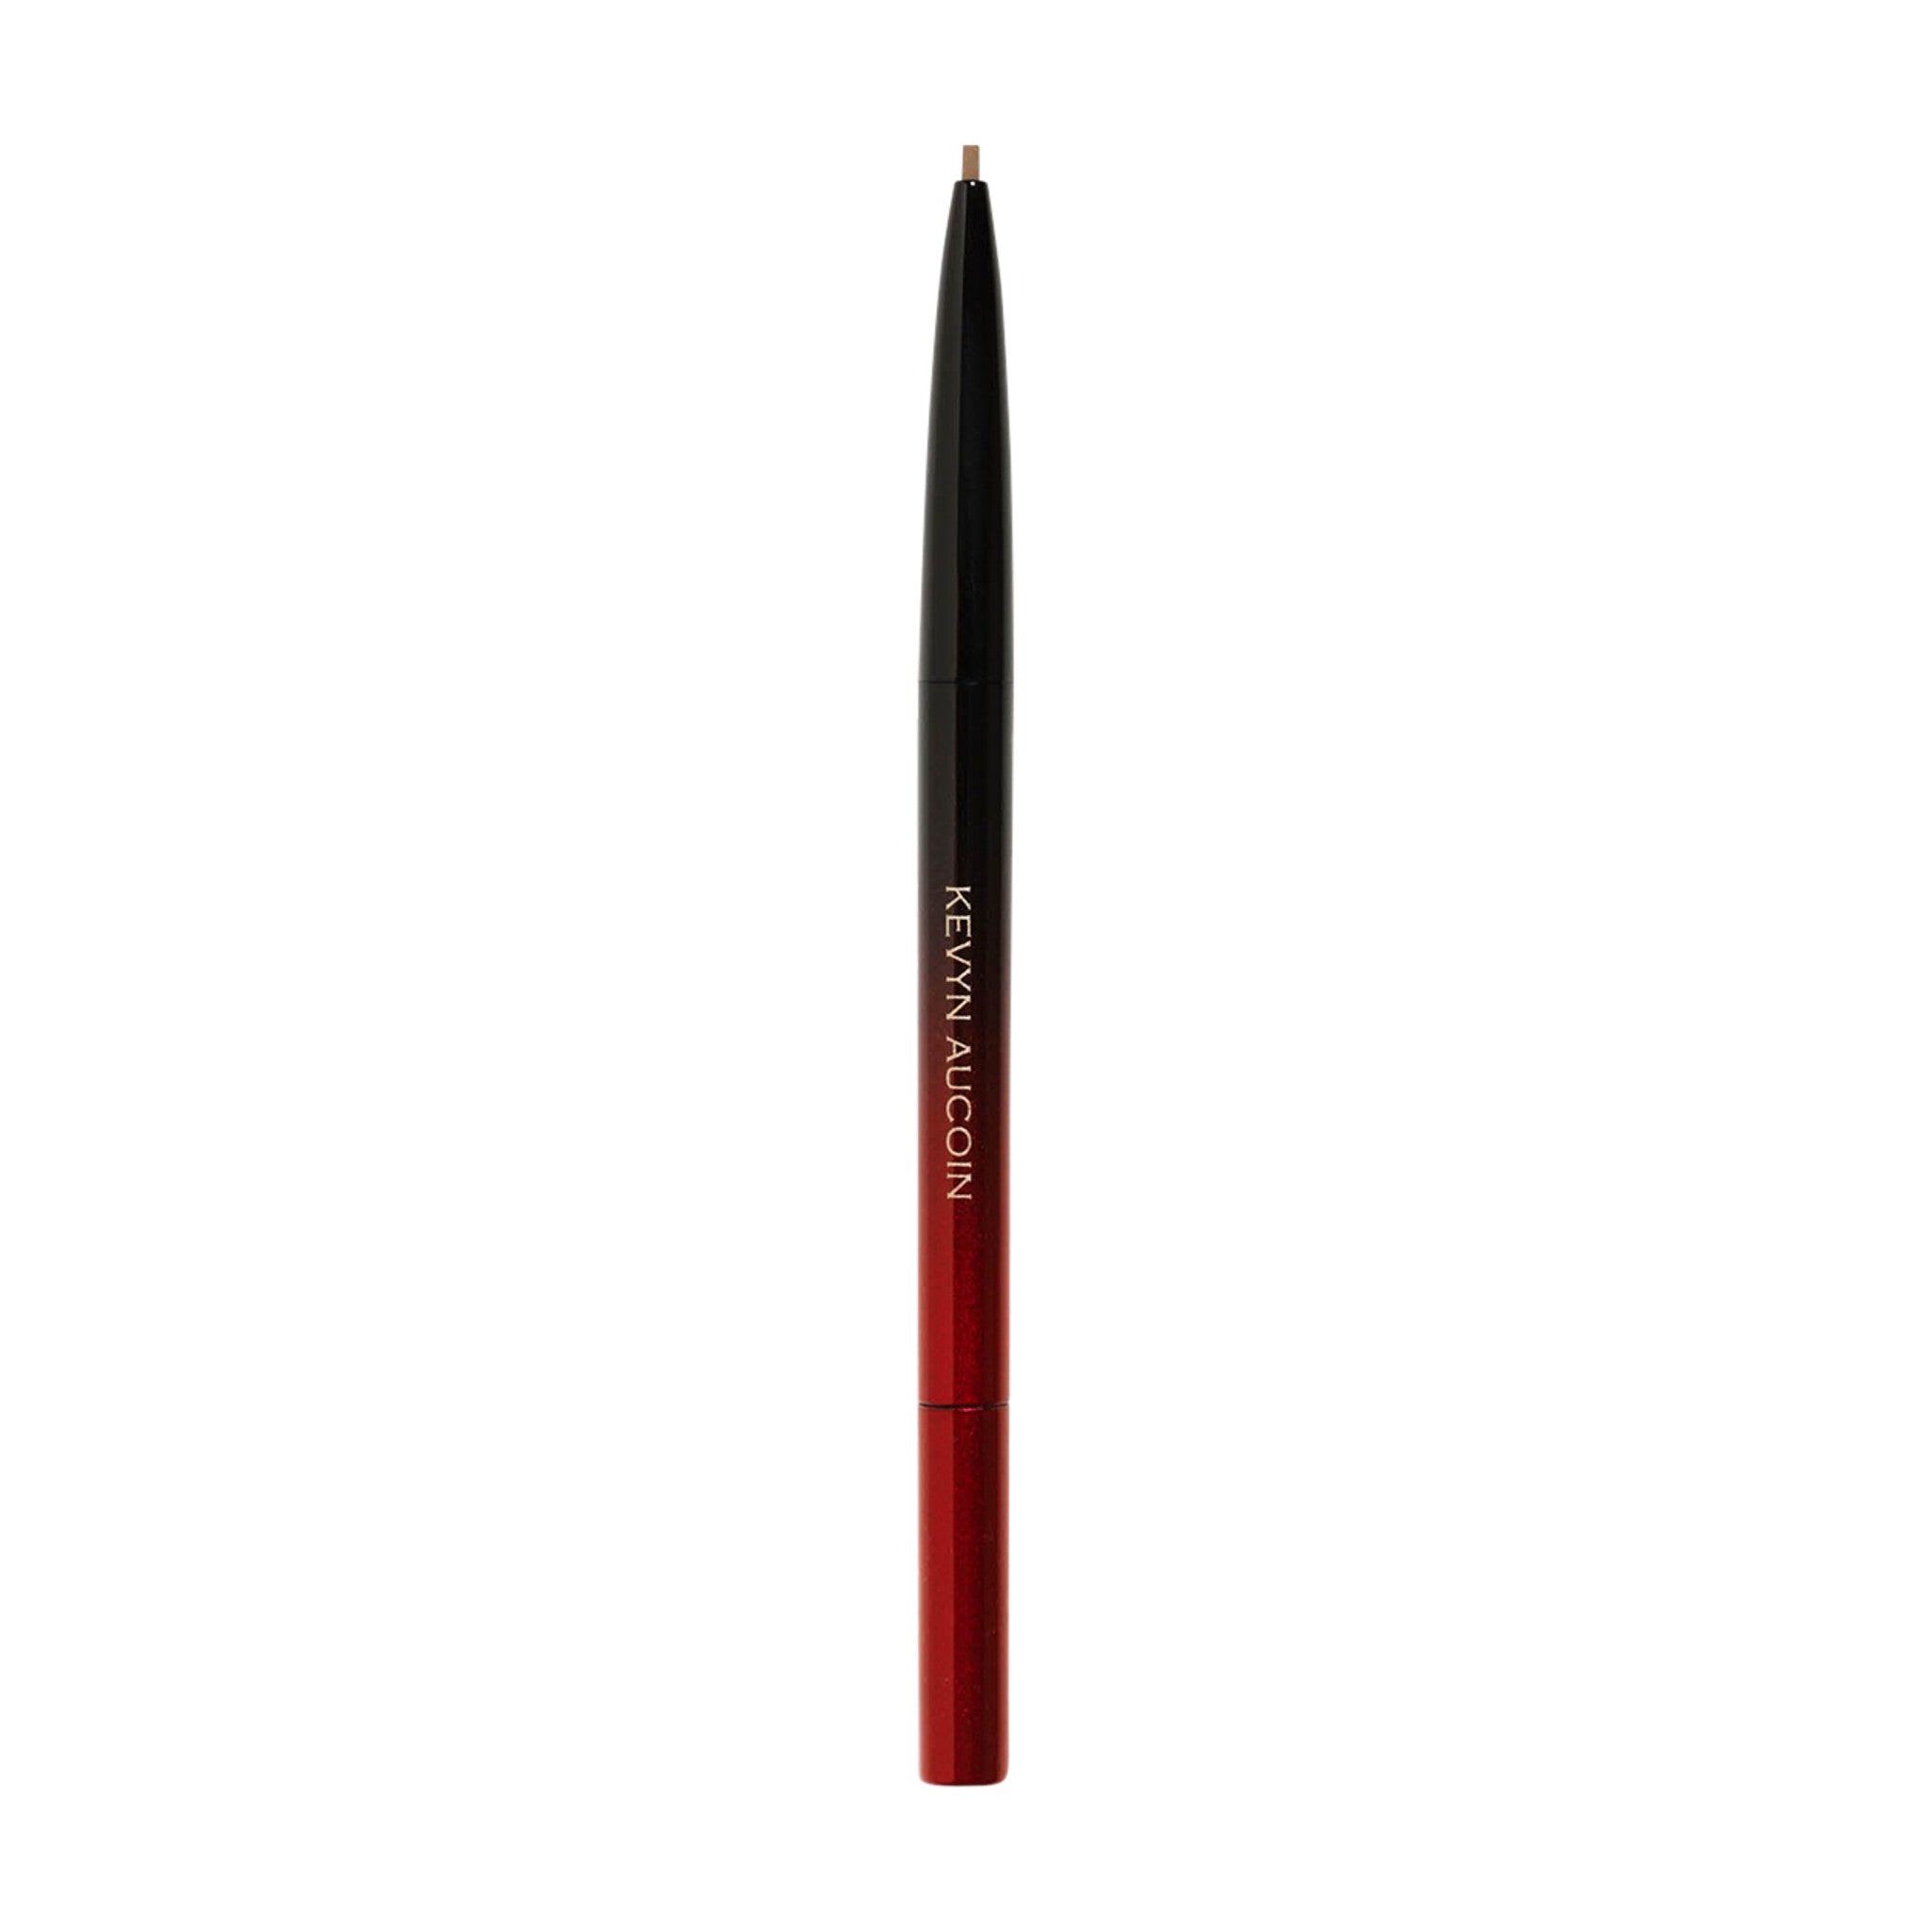 Kevyn Aucoin The Precision Brow Pencil Color/Shade variant: Ash Blonde main image. This product is in the color brown